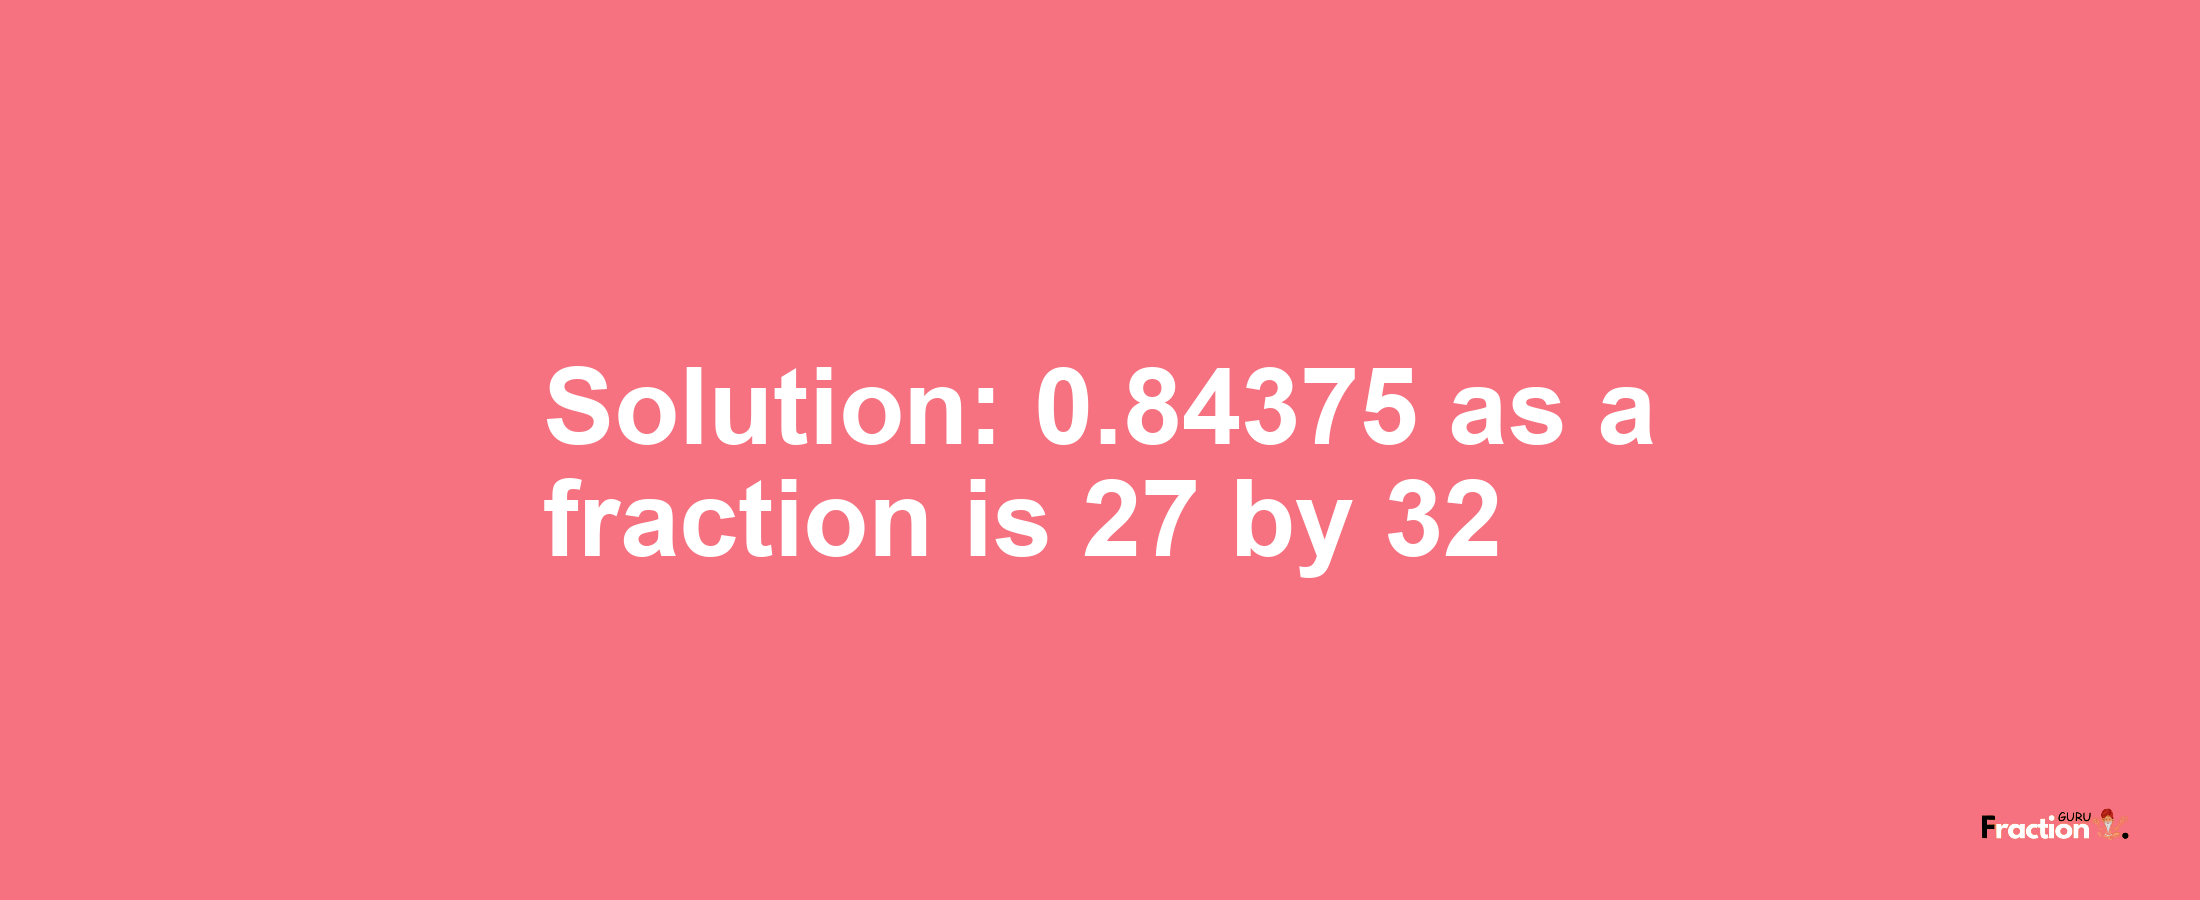 Solution:0.84375 as a fraction is 27/32